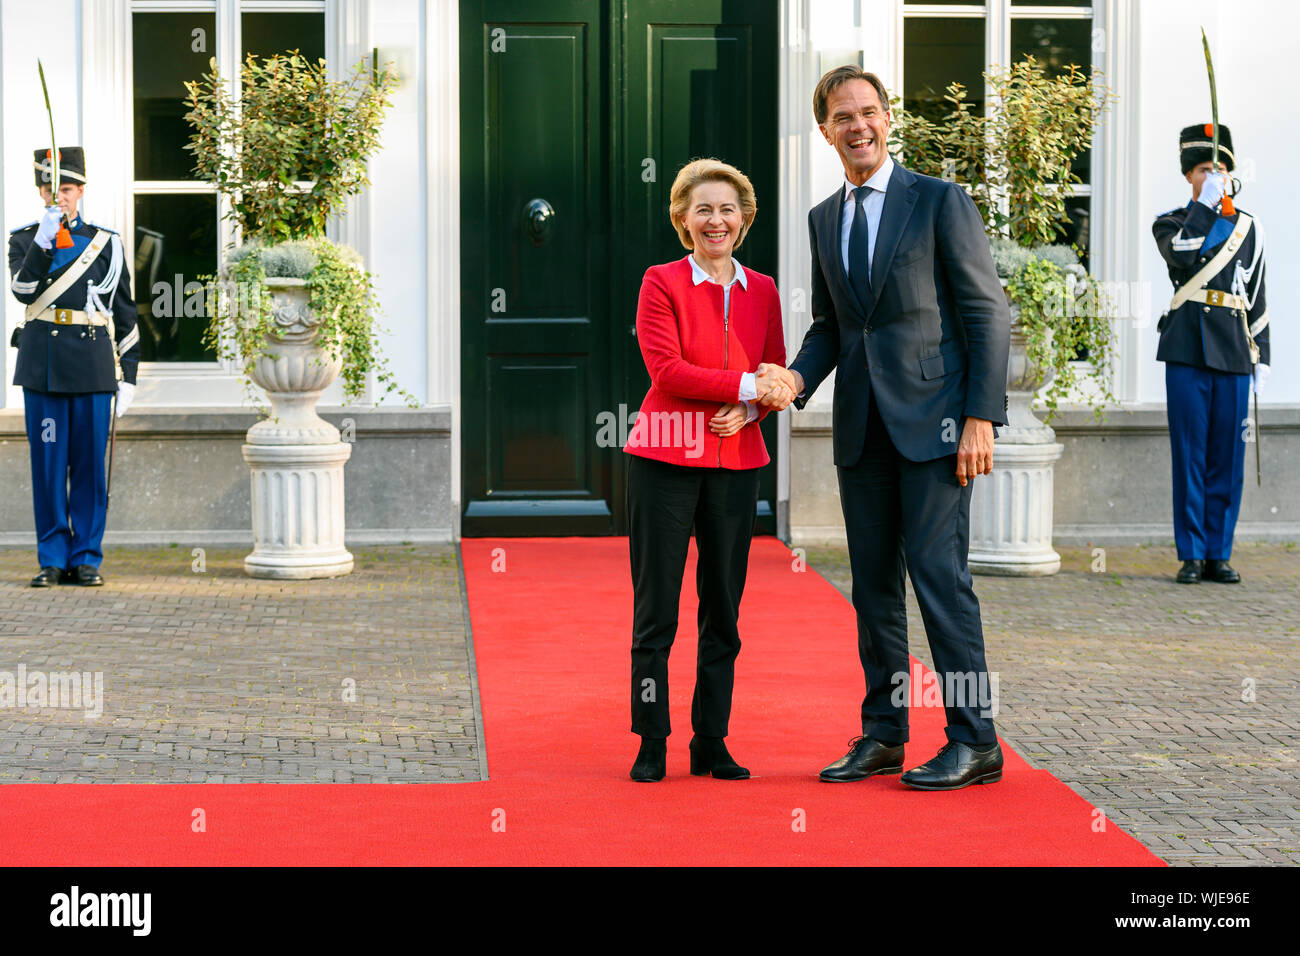 The Hague, Netherlands, September 3rd, 2019 (L to R: Ursula Von der Leyen and Mark Rutte). Prime Minister Mark Rutte receives future president of the European Commission Ursula Von der Leyen. The Prime Minister and the upcoming Commission President will discuss the agenda for the new European Commission. Stock Photo